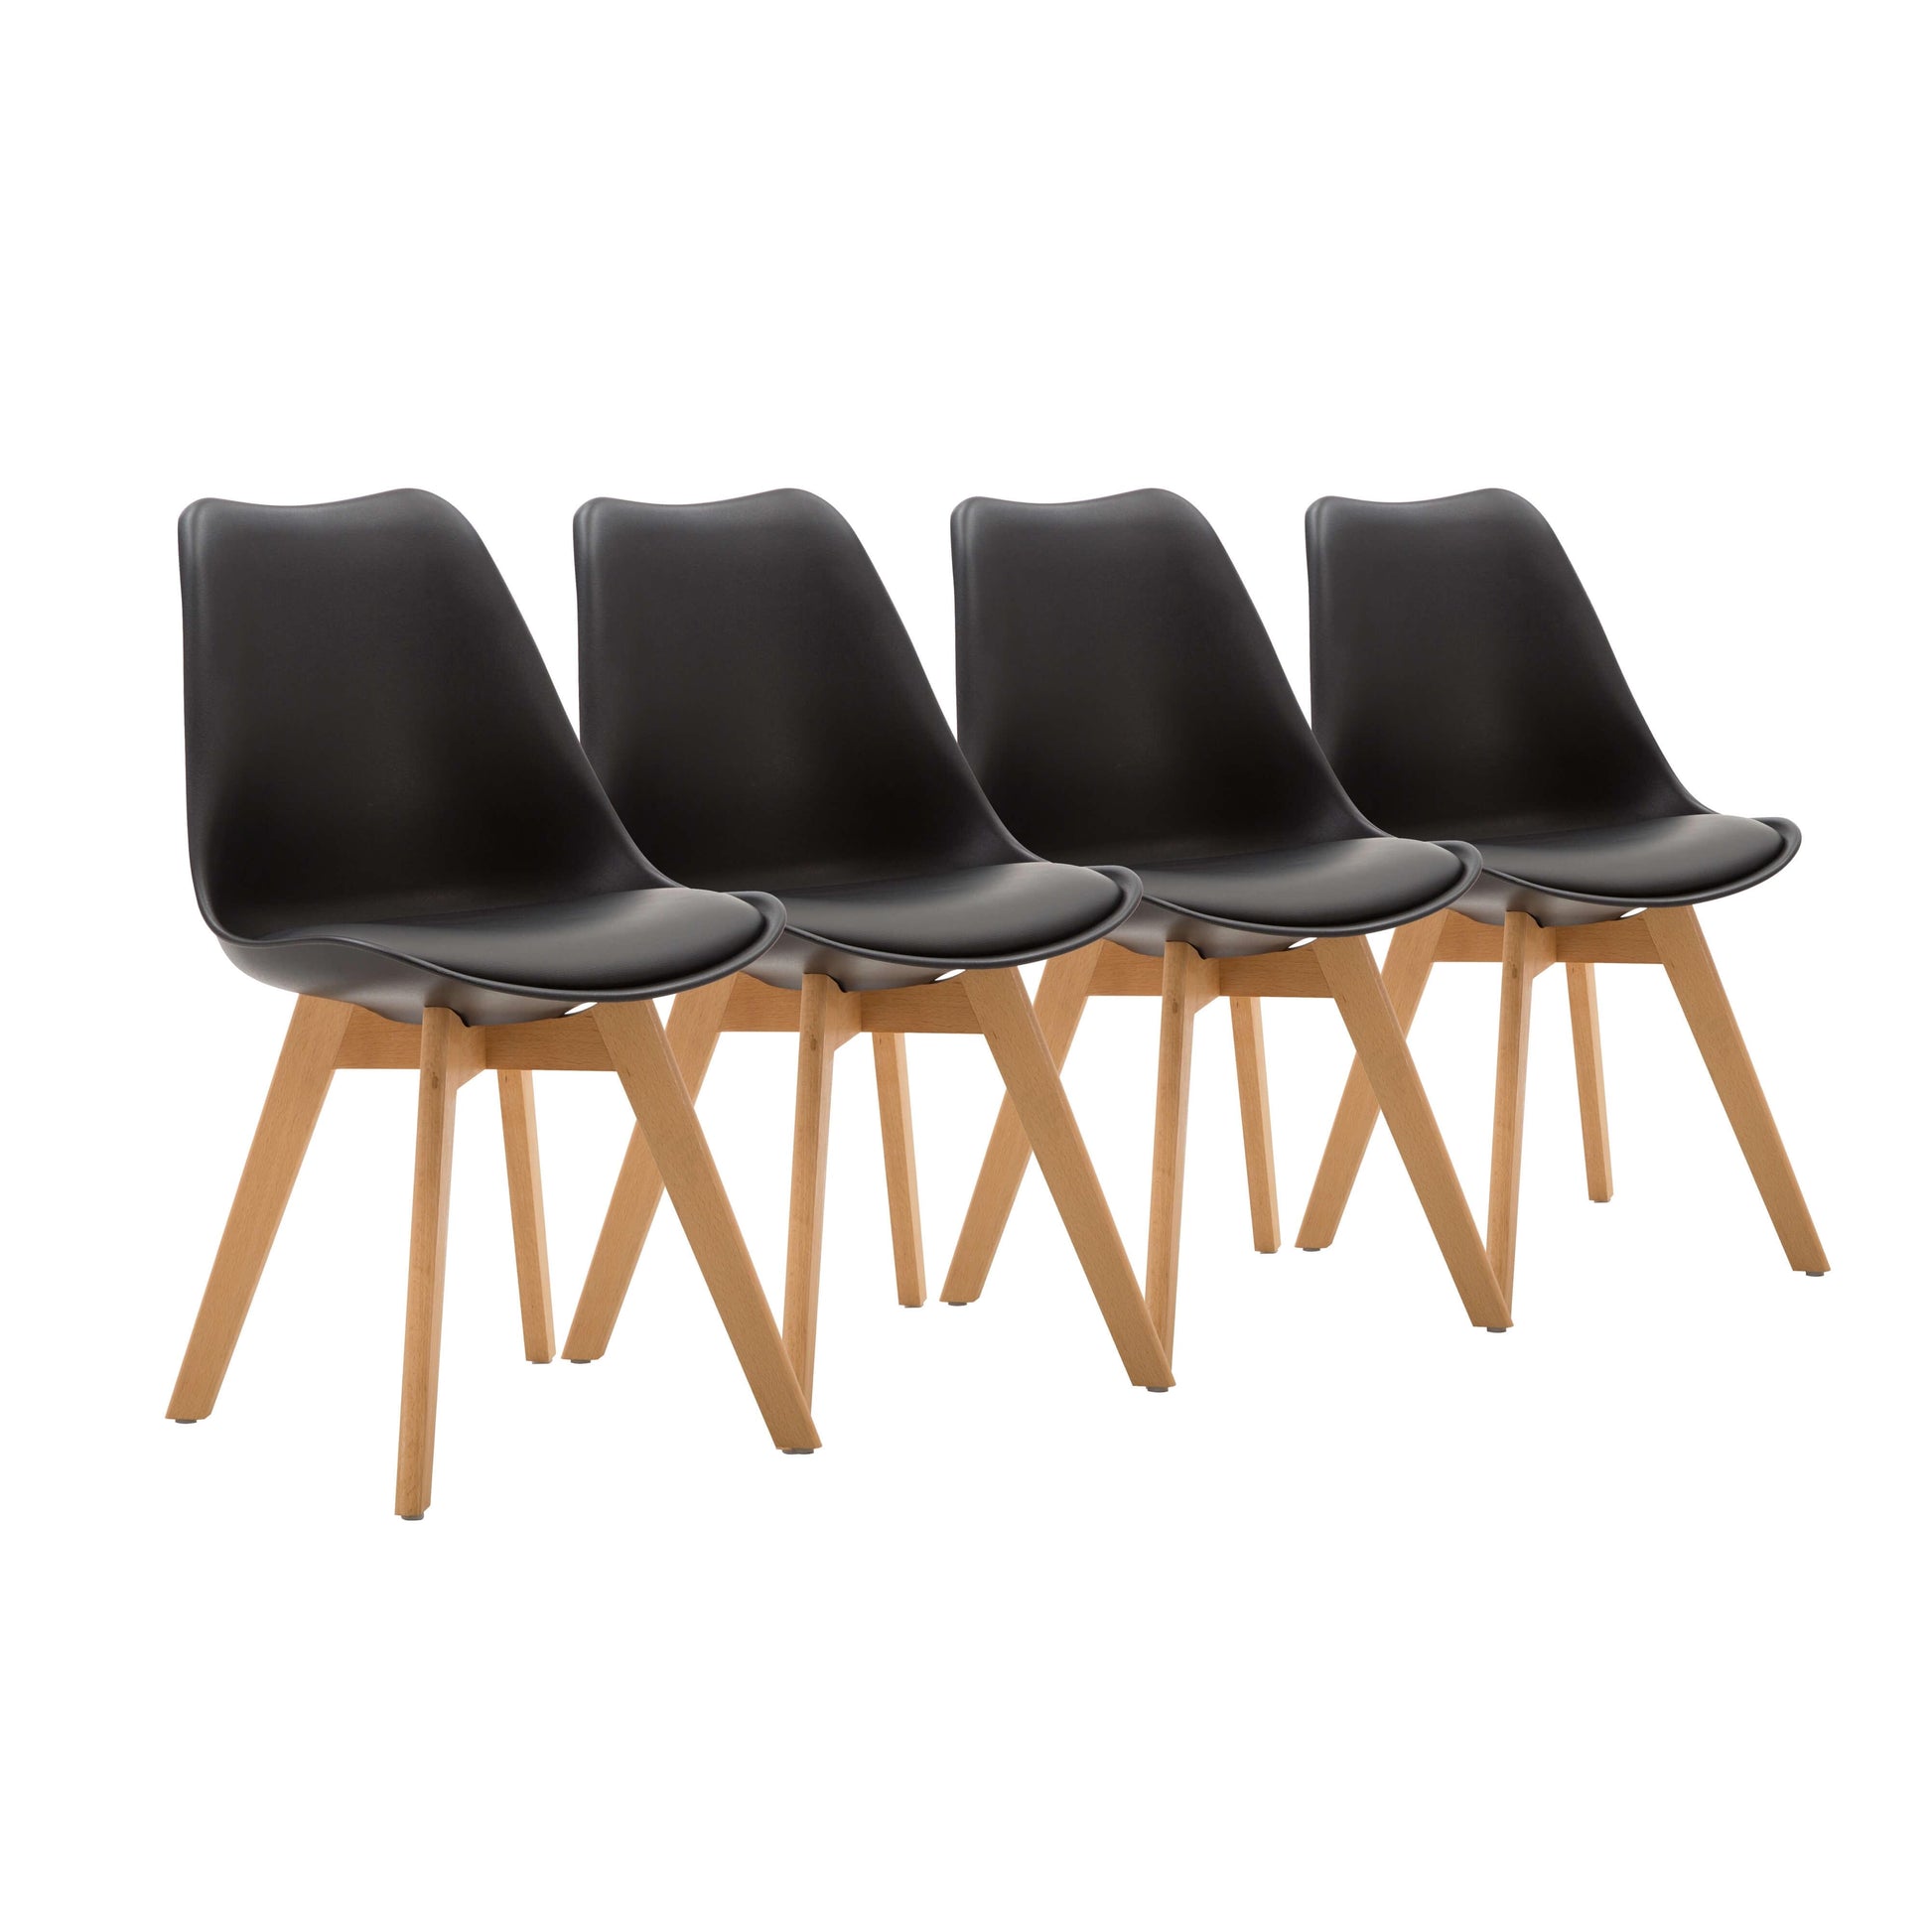 Ando Dining Chairs - Black x 4 - Chotto Furniture